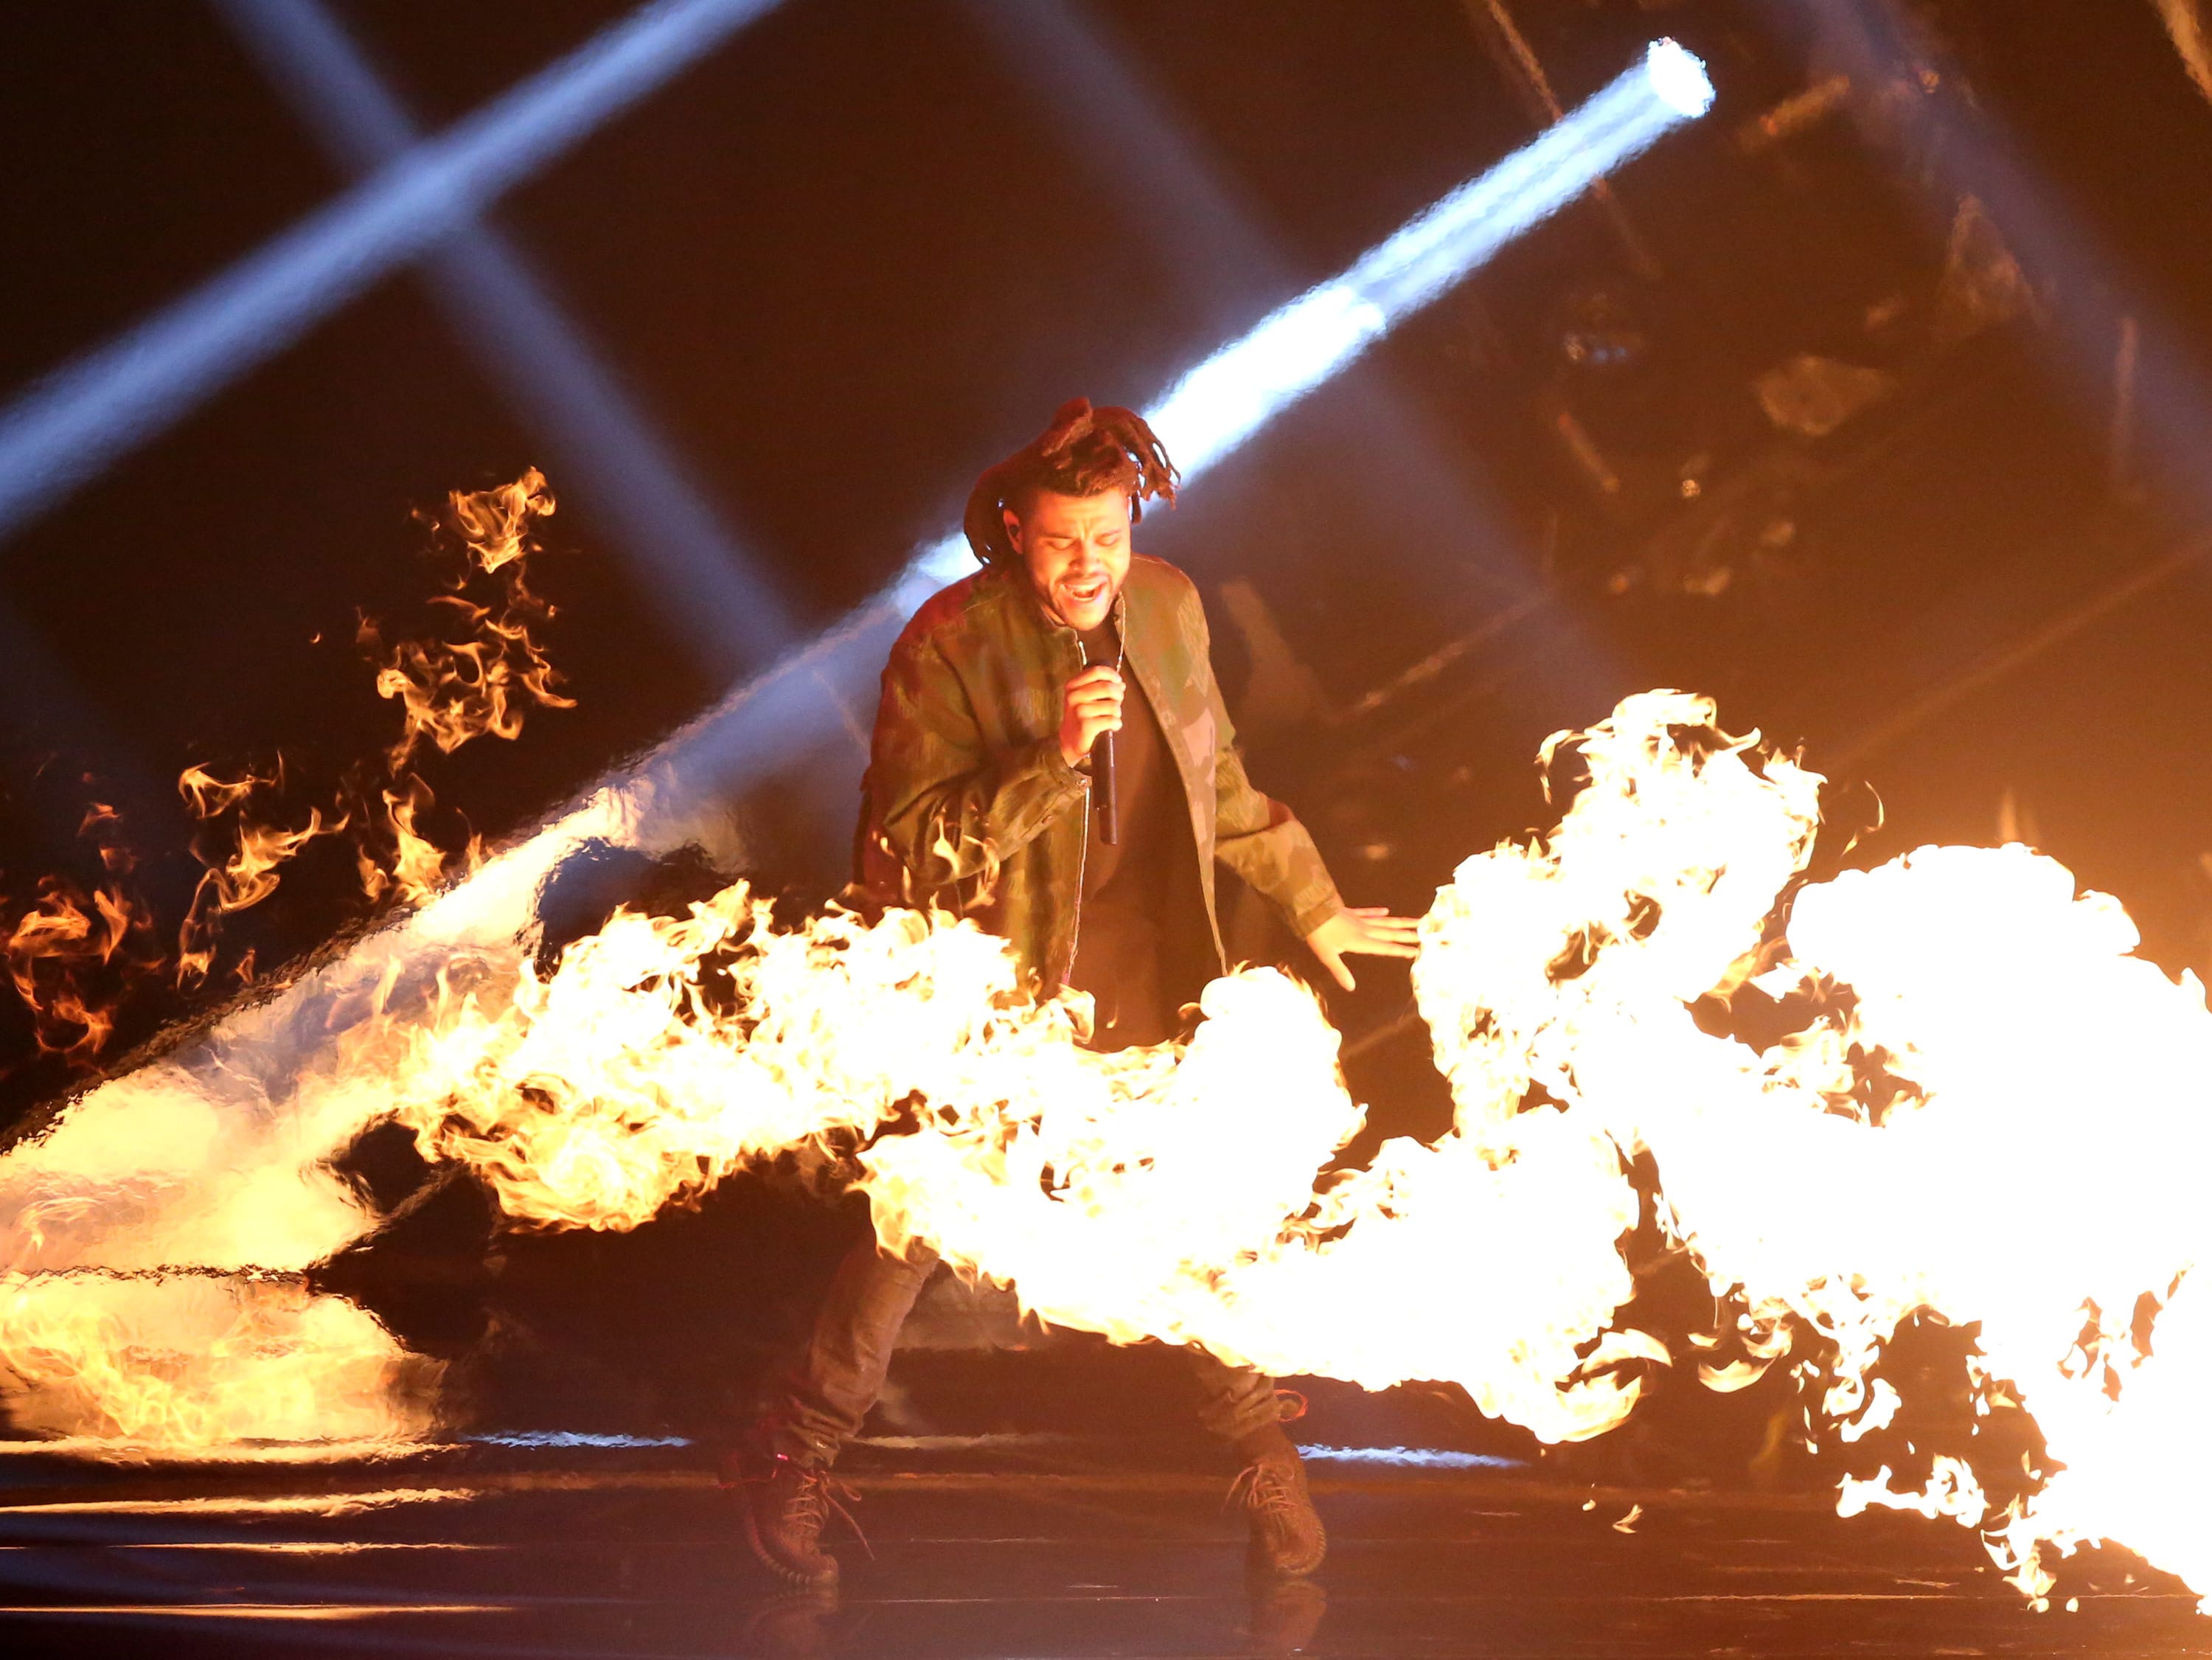 The Weeknd performs at the MTV Video Music Awards at the Microsoft Theater on Sunday in Los Angeles.